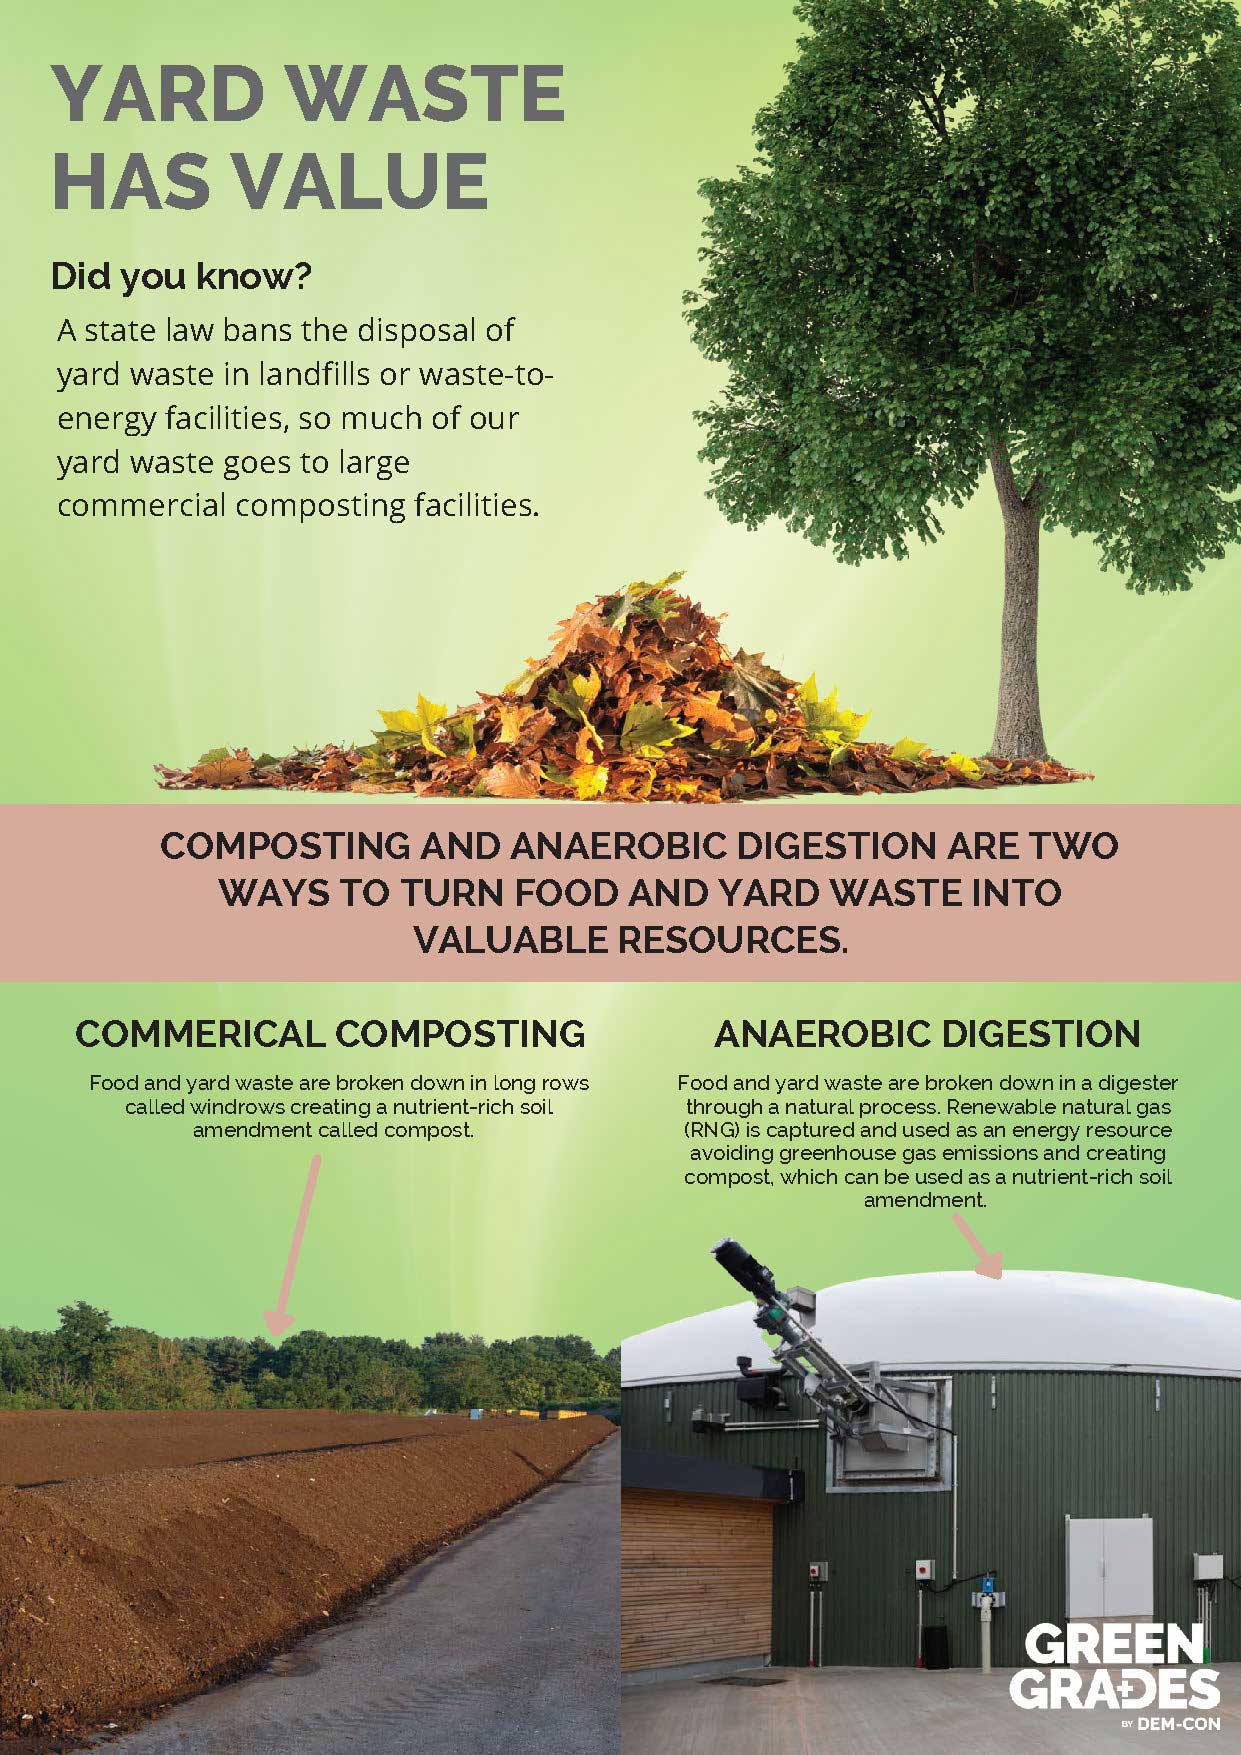 A flyer about yard waste and it's compost-ability